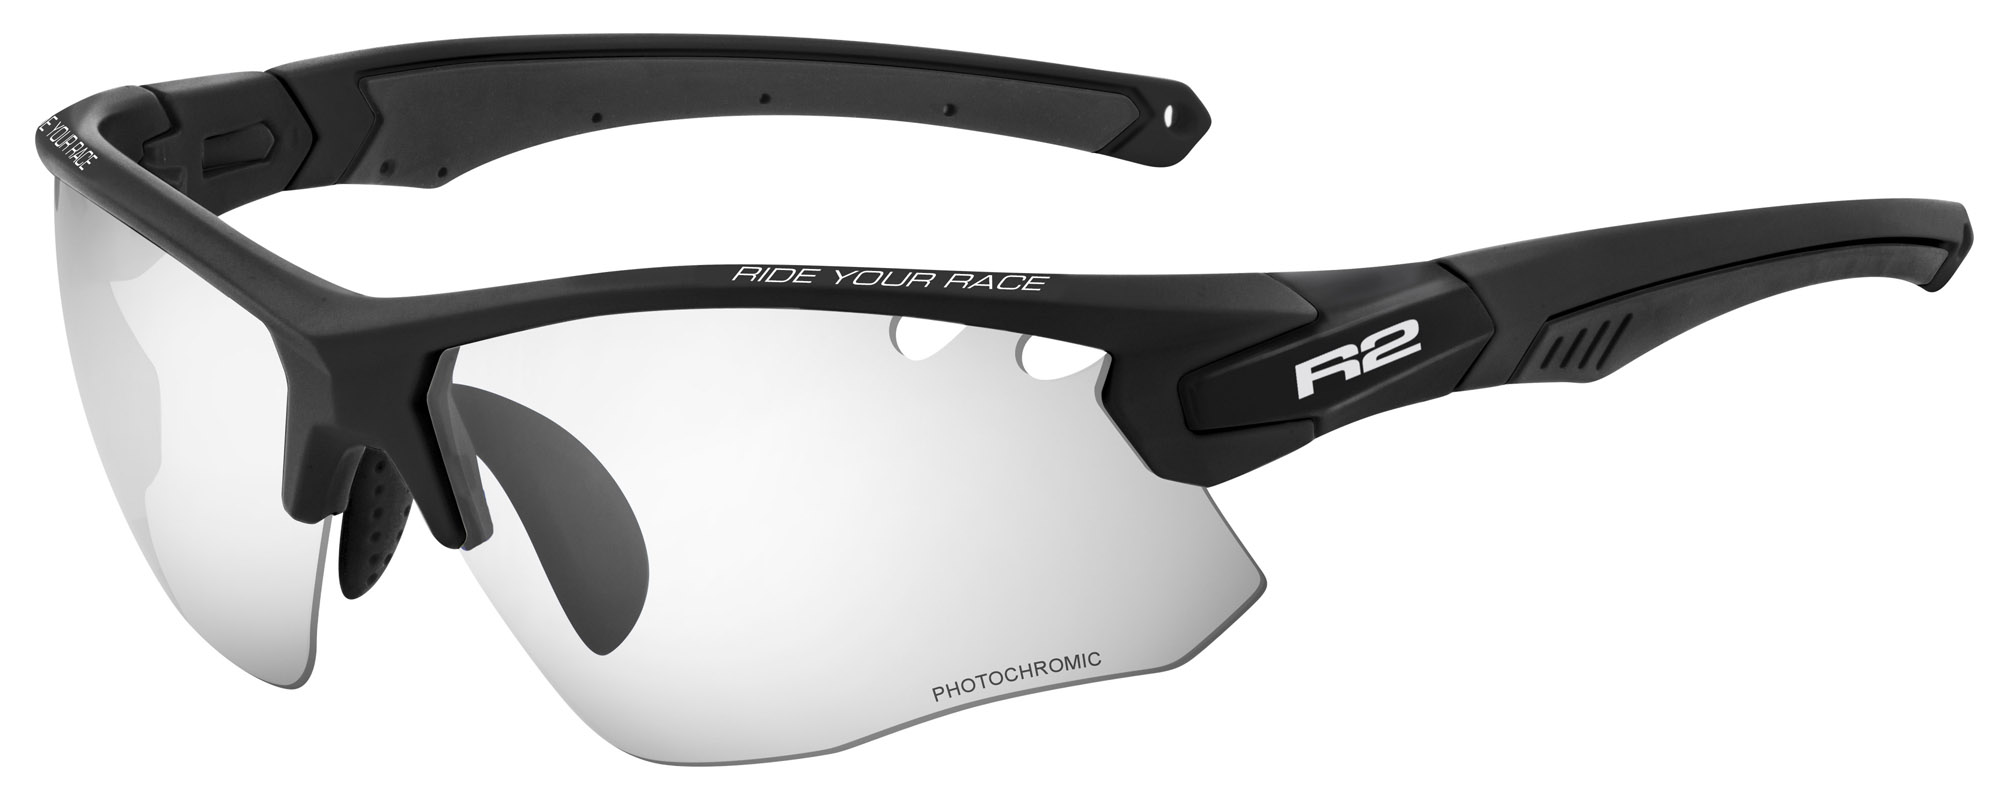 Photochromatic sunglasses  R2 CROWN AT078M